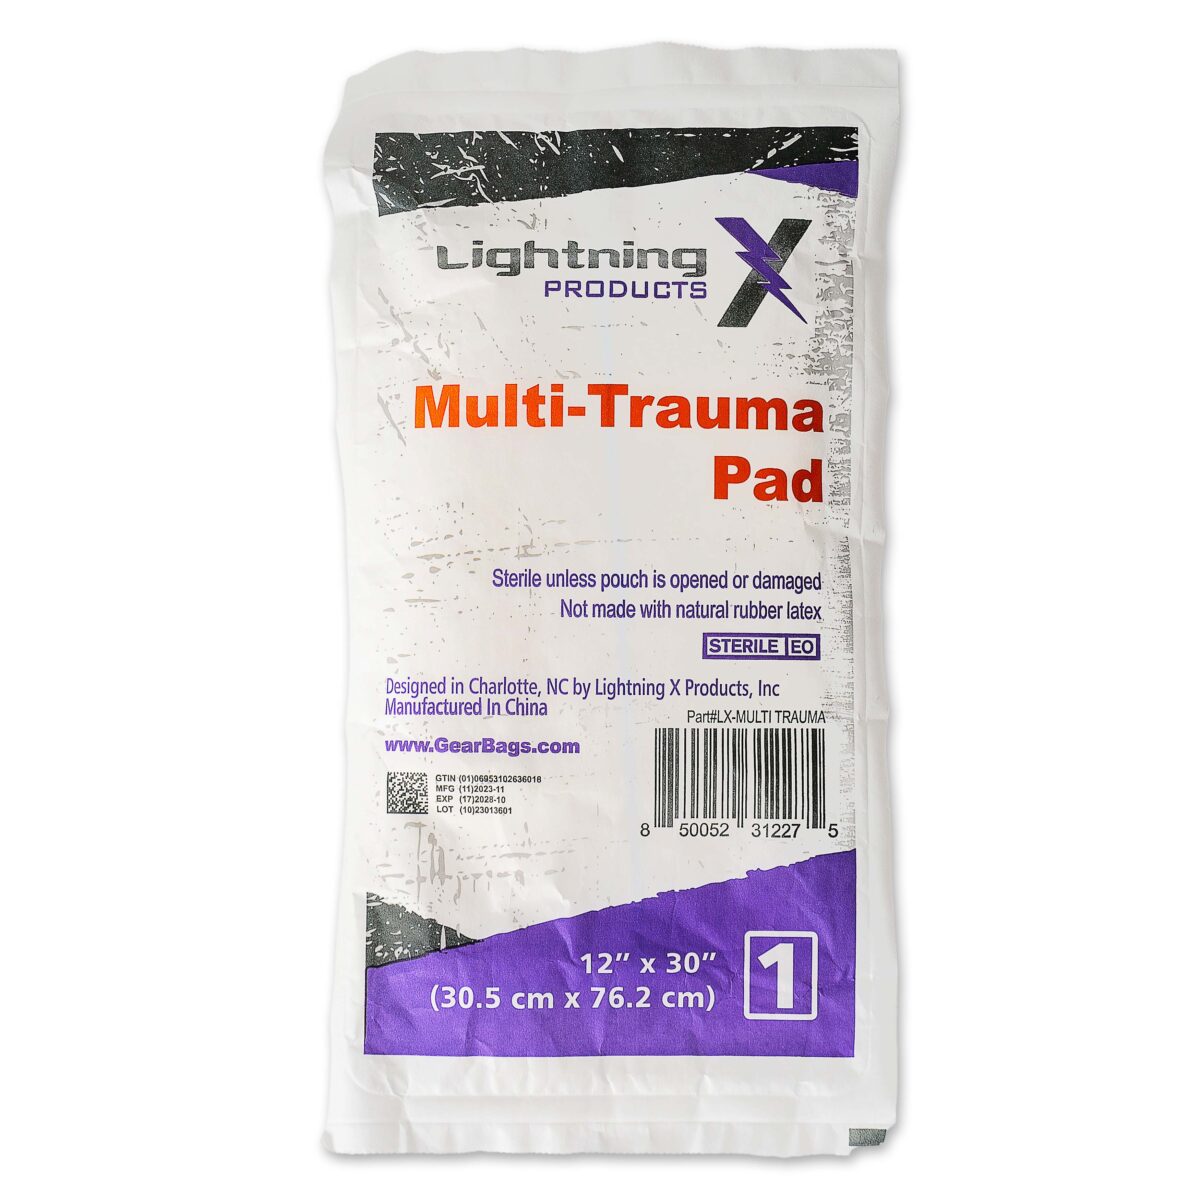 lightning x multi trauma dressing 12" x 30" 12x30 ABD sterile pad to stop bleeding in emergencies, great for first aid kit supplies